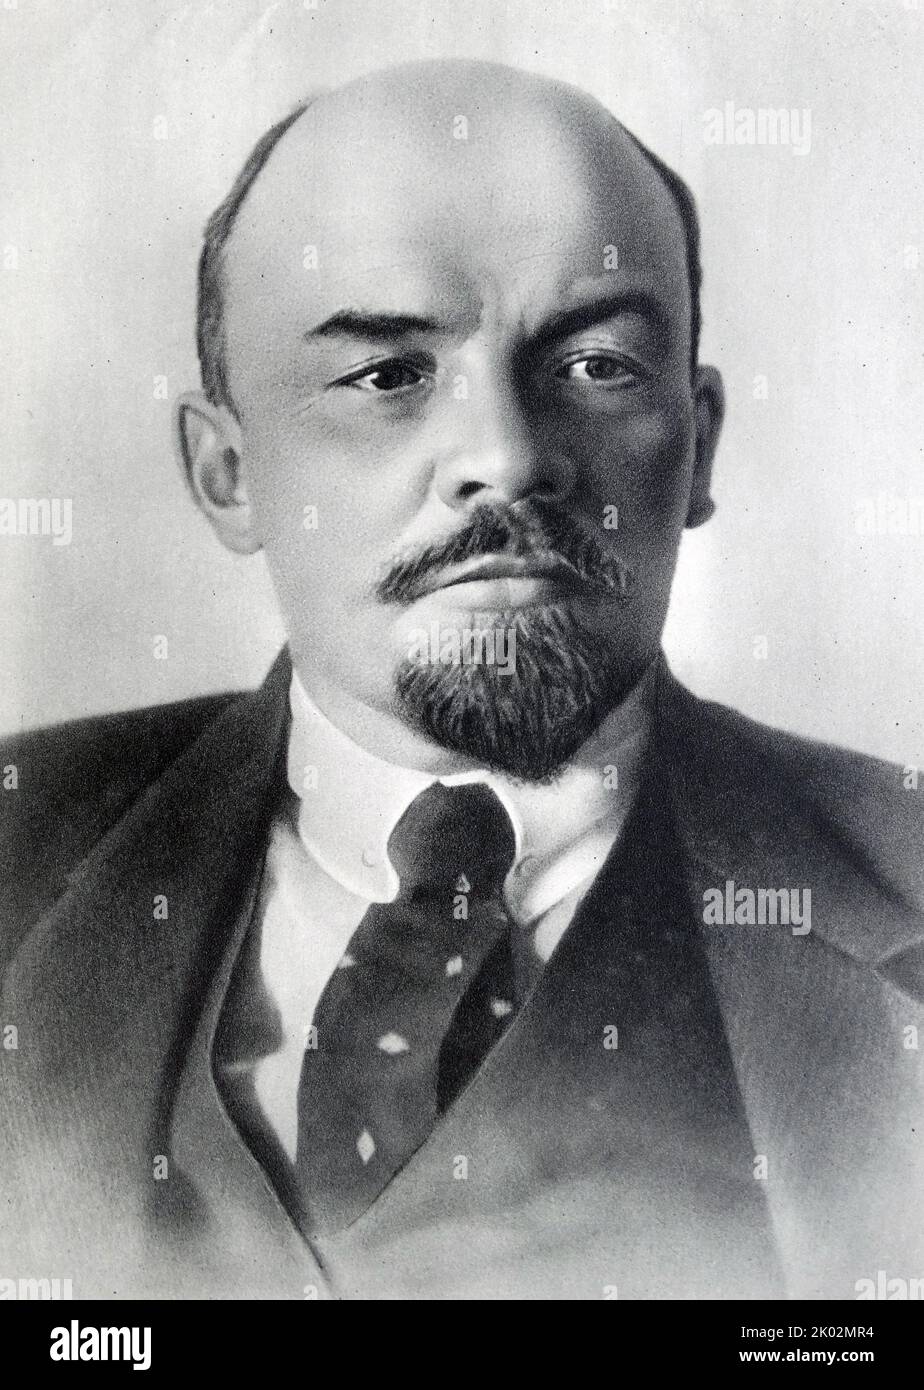 Vladimir Ilyich Ulyanov (1870 - 1924), better known as Lenin. Russian revolutionary, politician, and political theorist. He served as head of government of Soviet Russia from 1917 to 1924 and of the Soviet Union from 1922 to 1924. Stock Photo